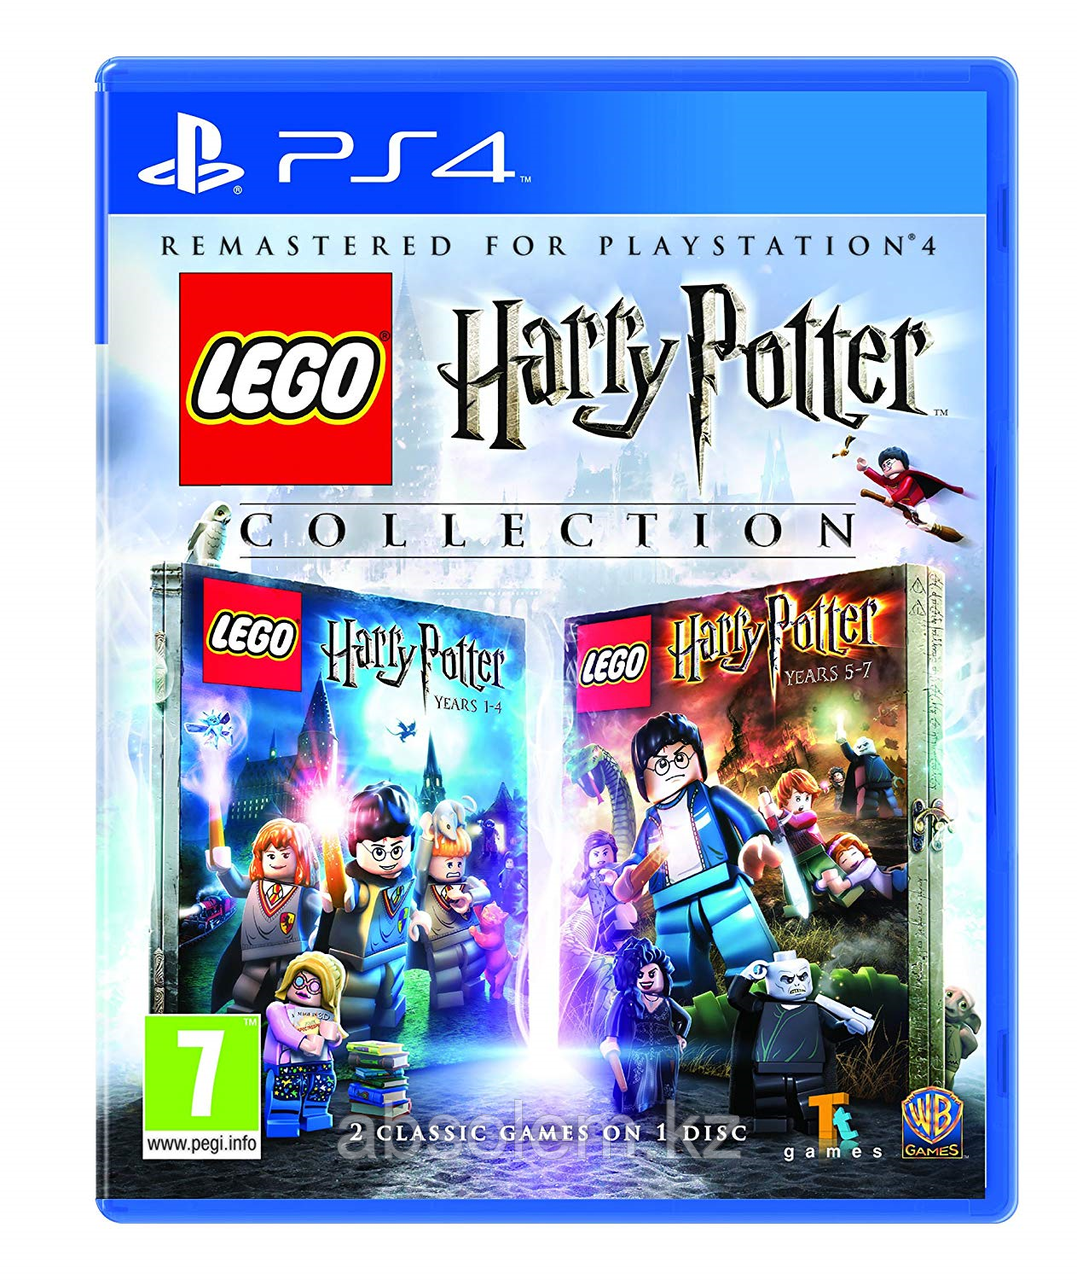 LEGO Harry Potter collection ps4